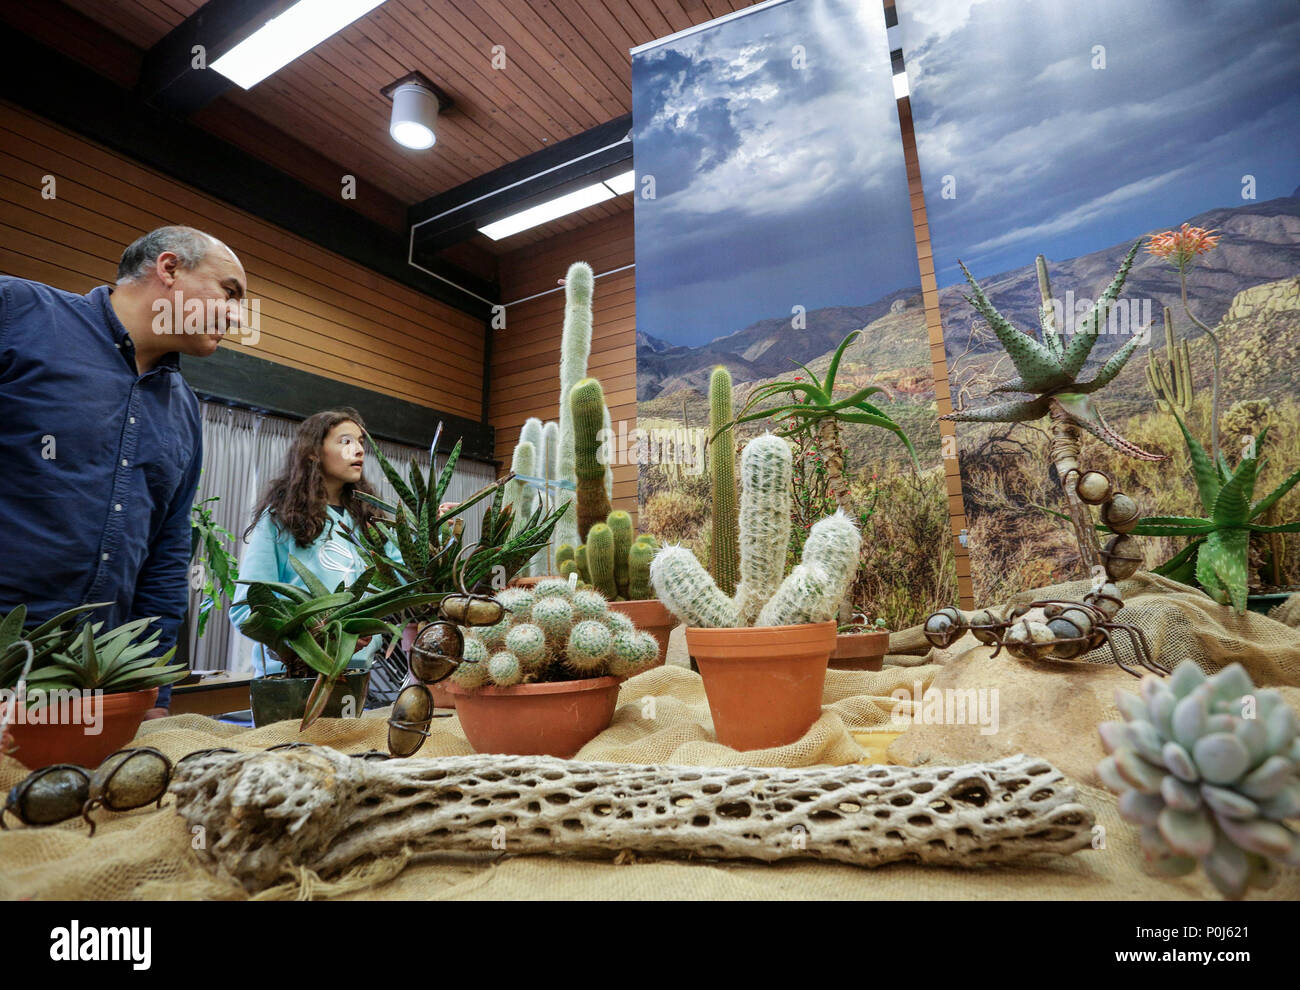 Vancouver, Canada. 9th June, 2018. Visitors look at different cactus and succulent plants at the Vancouver Desert Plant Show in Vancouver, Canada, June 9, 2018. The annual Vancouver Desert Plant Show is a two-day event to provide opportunities for the cactus and succulent plants enthusiasts to show their plants and share planting experiences. Credit: Liang Sen/Xinhua/Alamy Live News Stock Photo